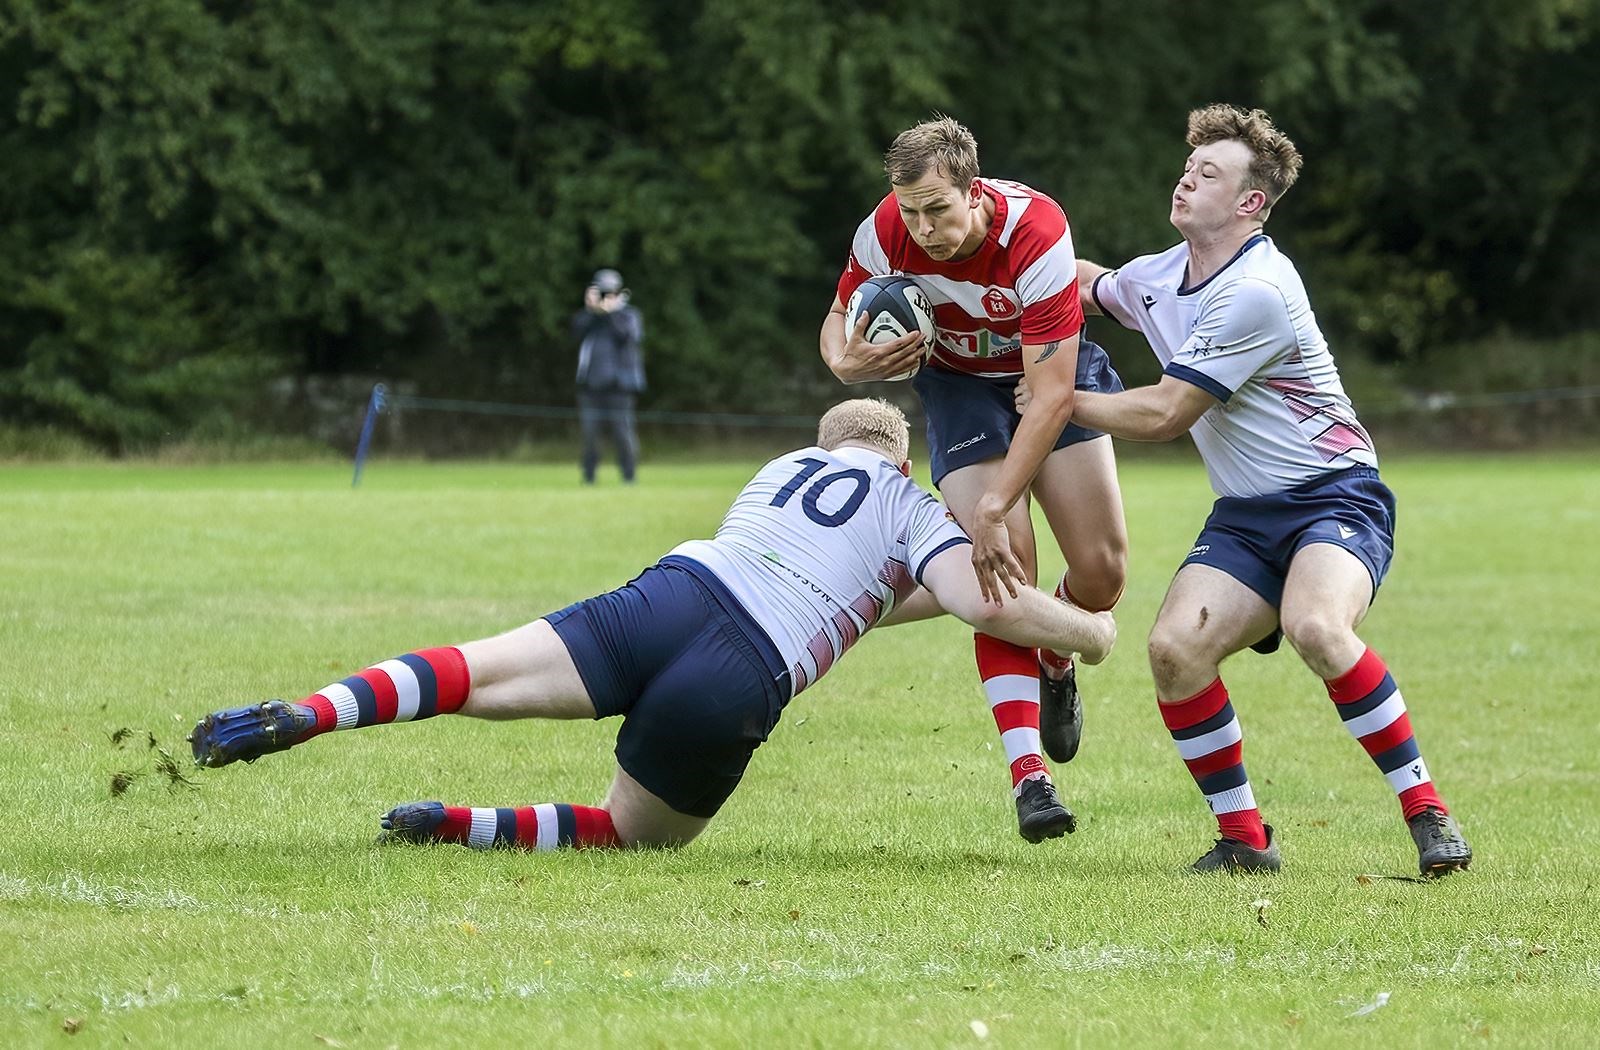 Cameron Ireland being tackled by two defenders. Picture: John MacGregor